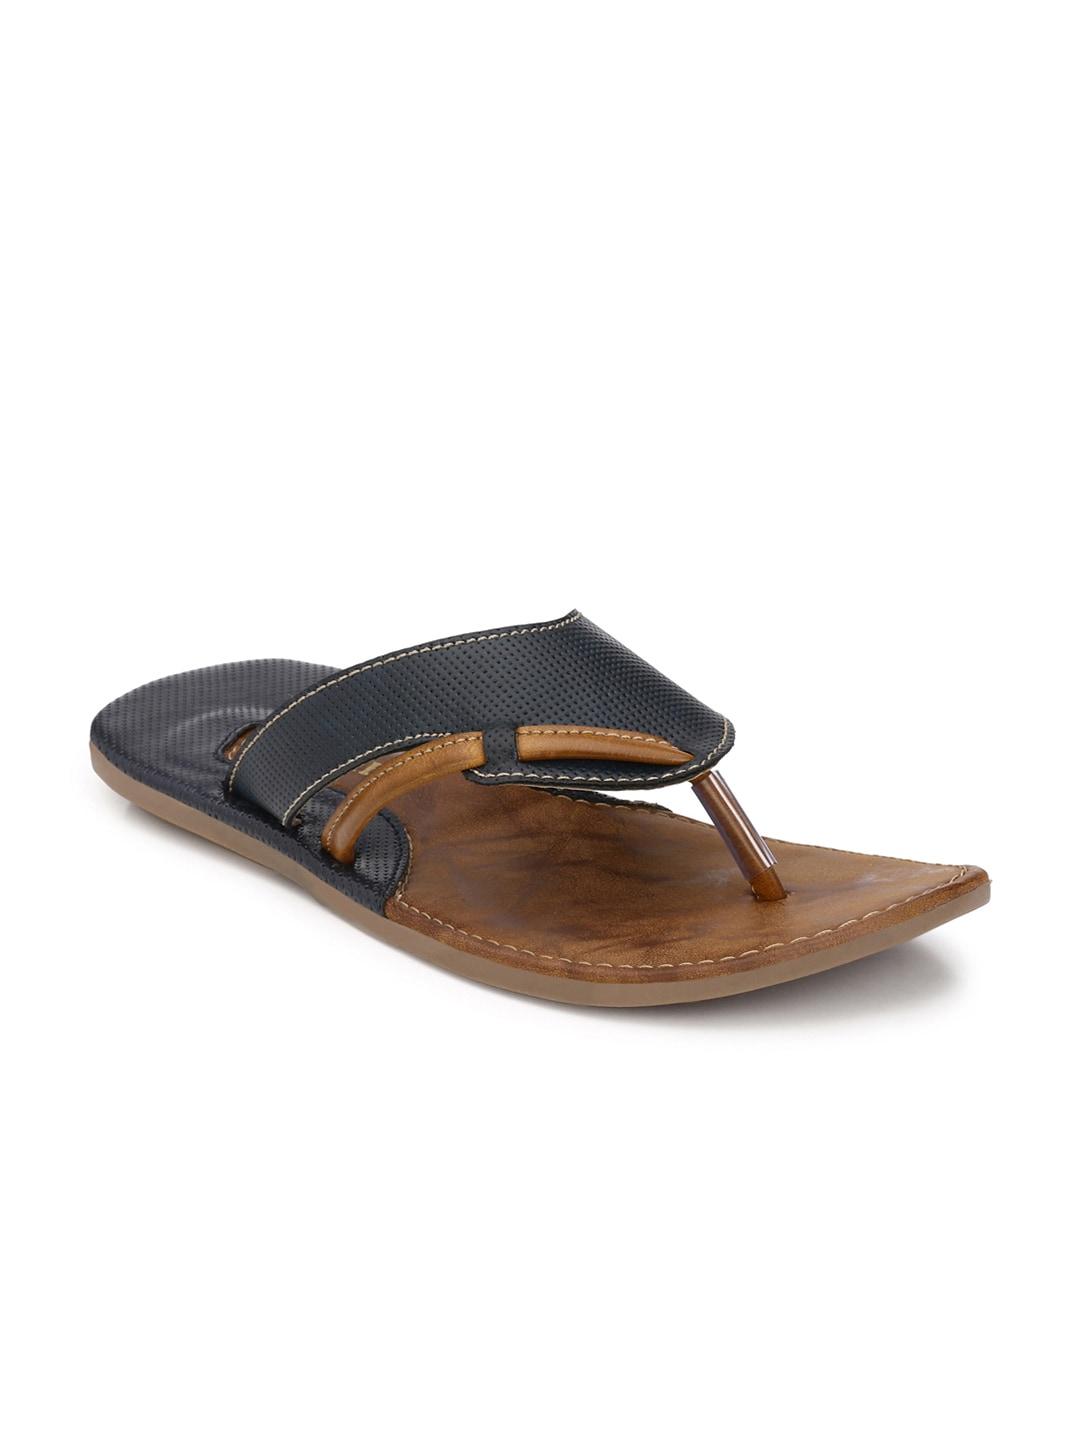 prolific men navy perforated sandals